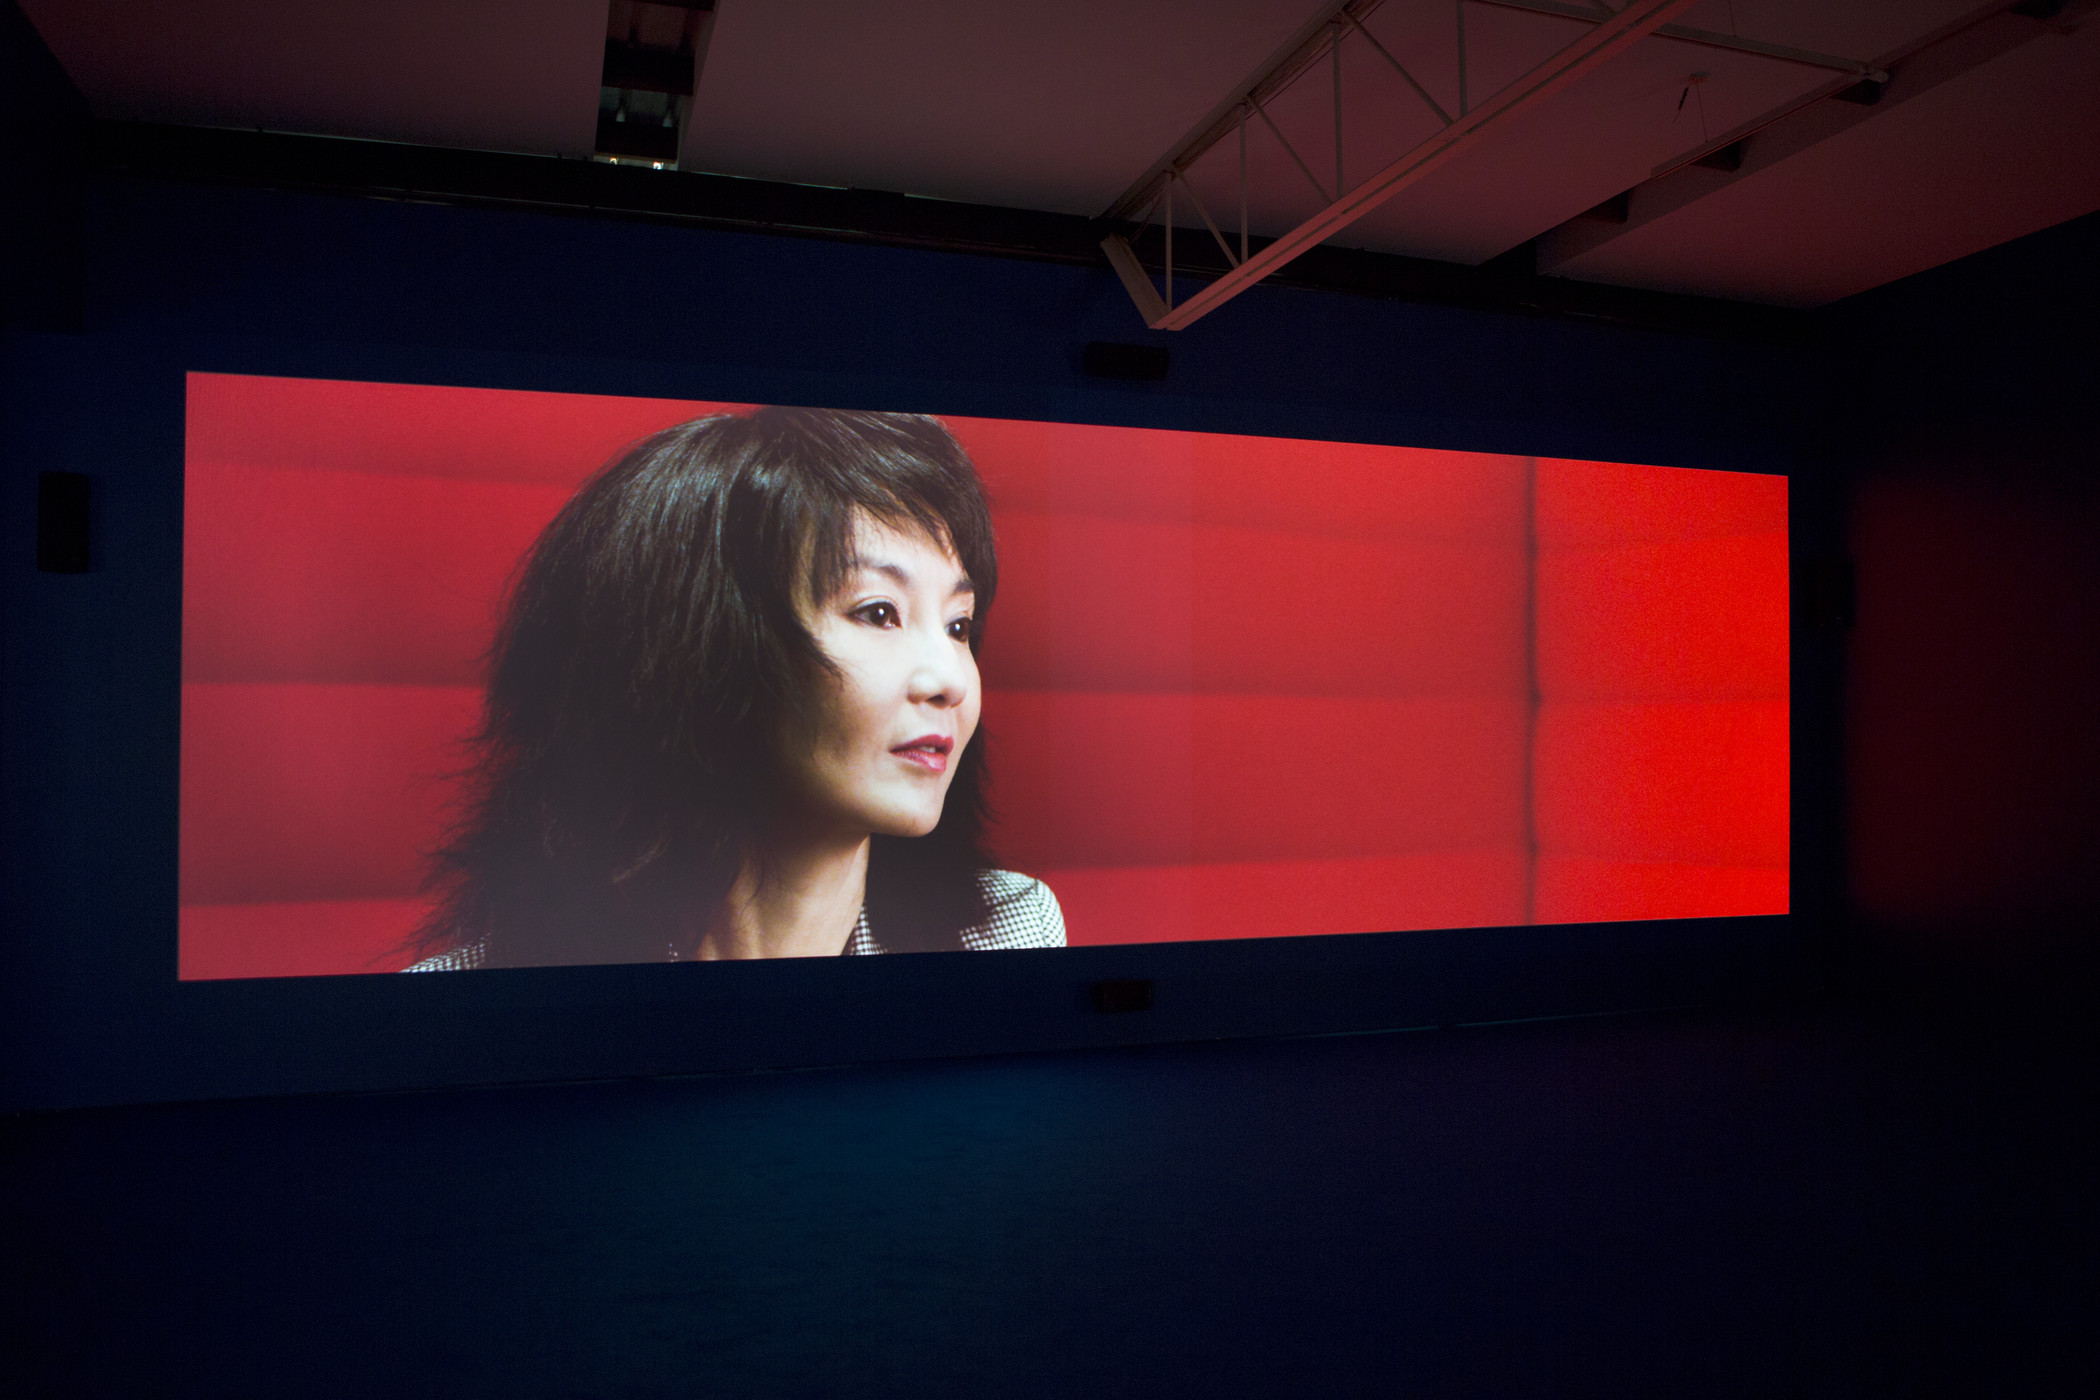  Isaac Julien, PLAYTIME, 2013, Los Angeles County Museum of Art, gift of Sheridan Brown, installation view, Roslyn Oxley9 Gallery, Sydney, 2013, © Isaac Julien, photo courtesy the artist 